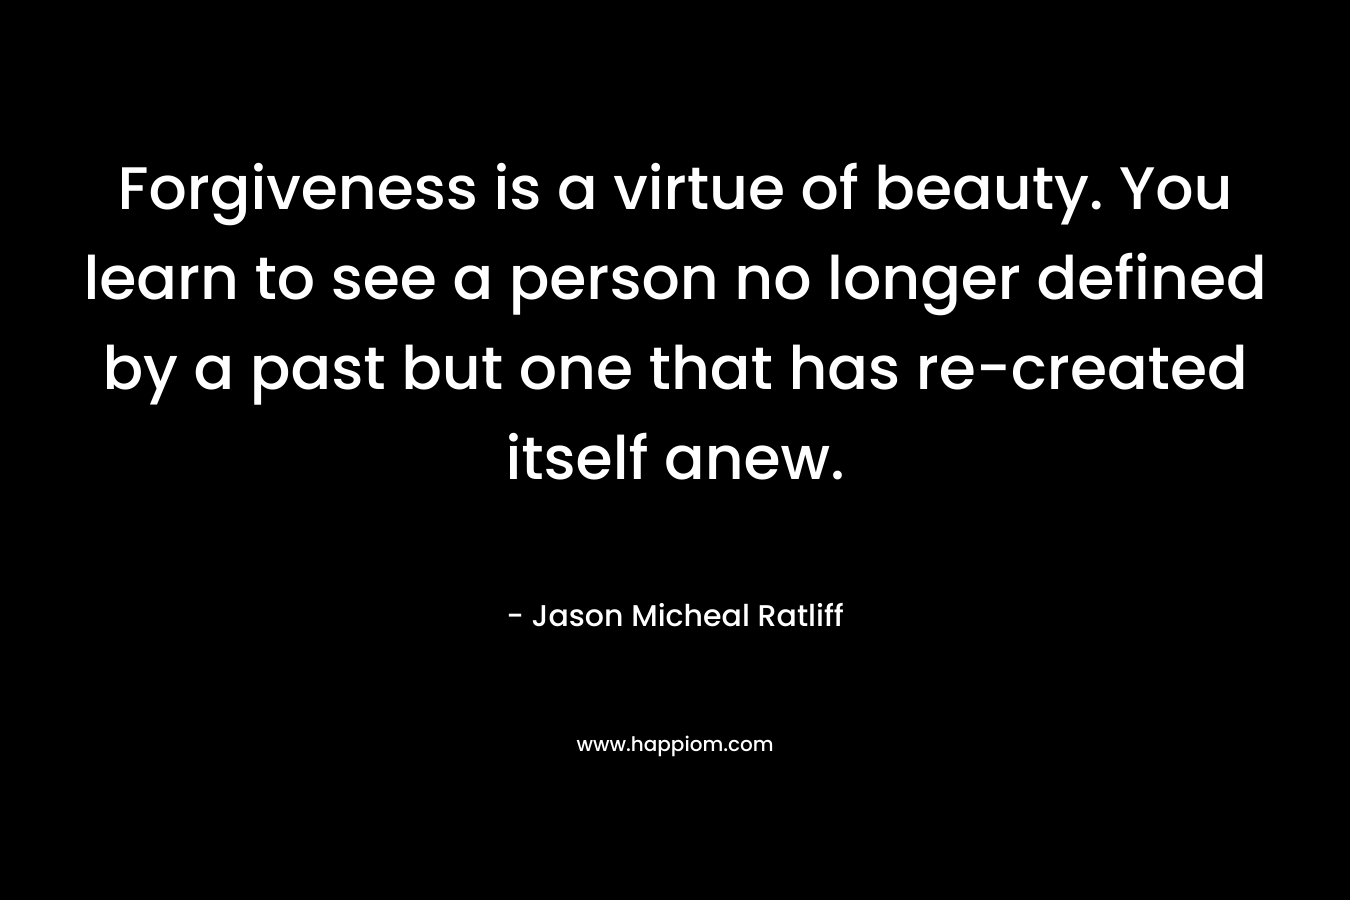 Forgiveness is a virtue of beauty. You learn to see a person no longer defined by a past but one that has re-created itself anew.